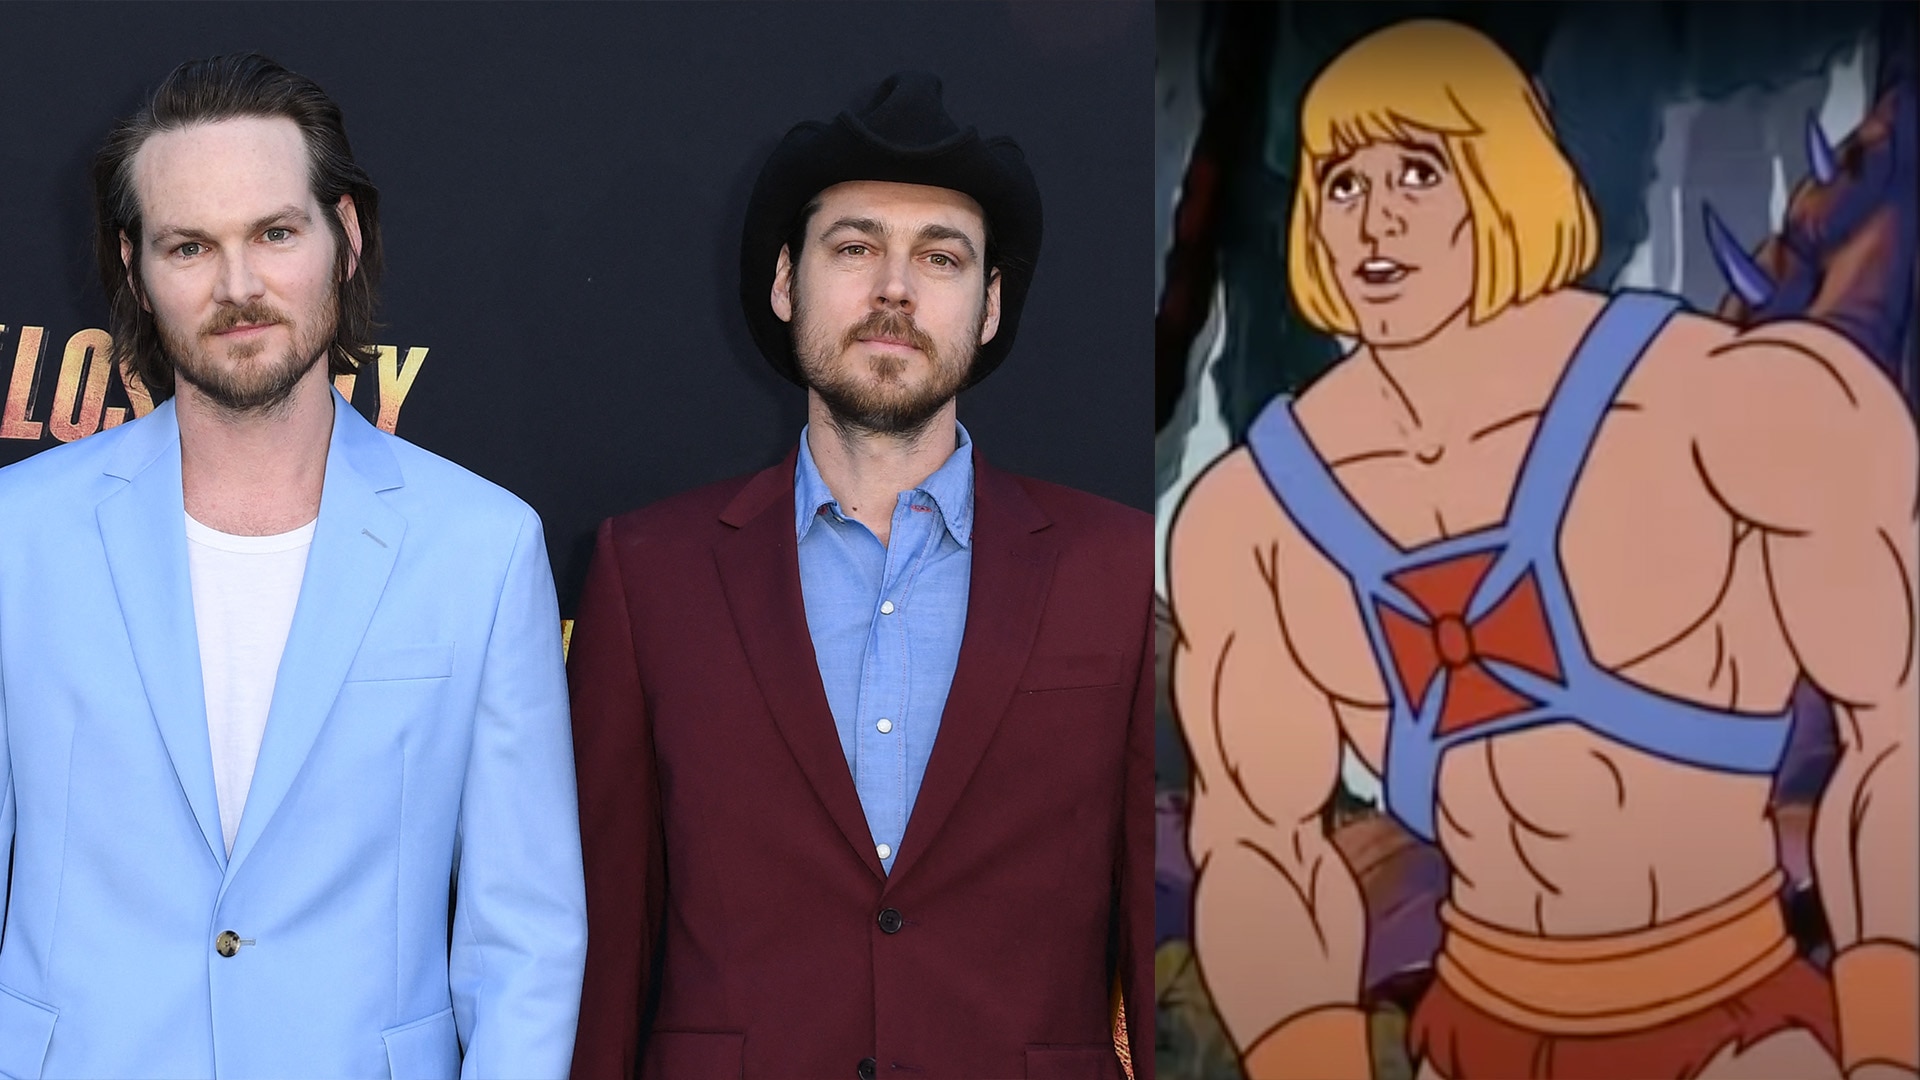 Kyle Allen Replaces Noah Centineo as He-Man In Live Action